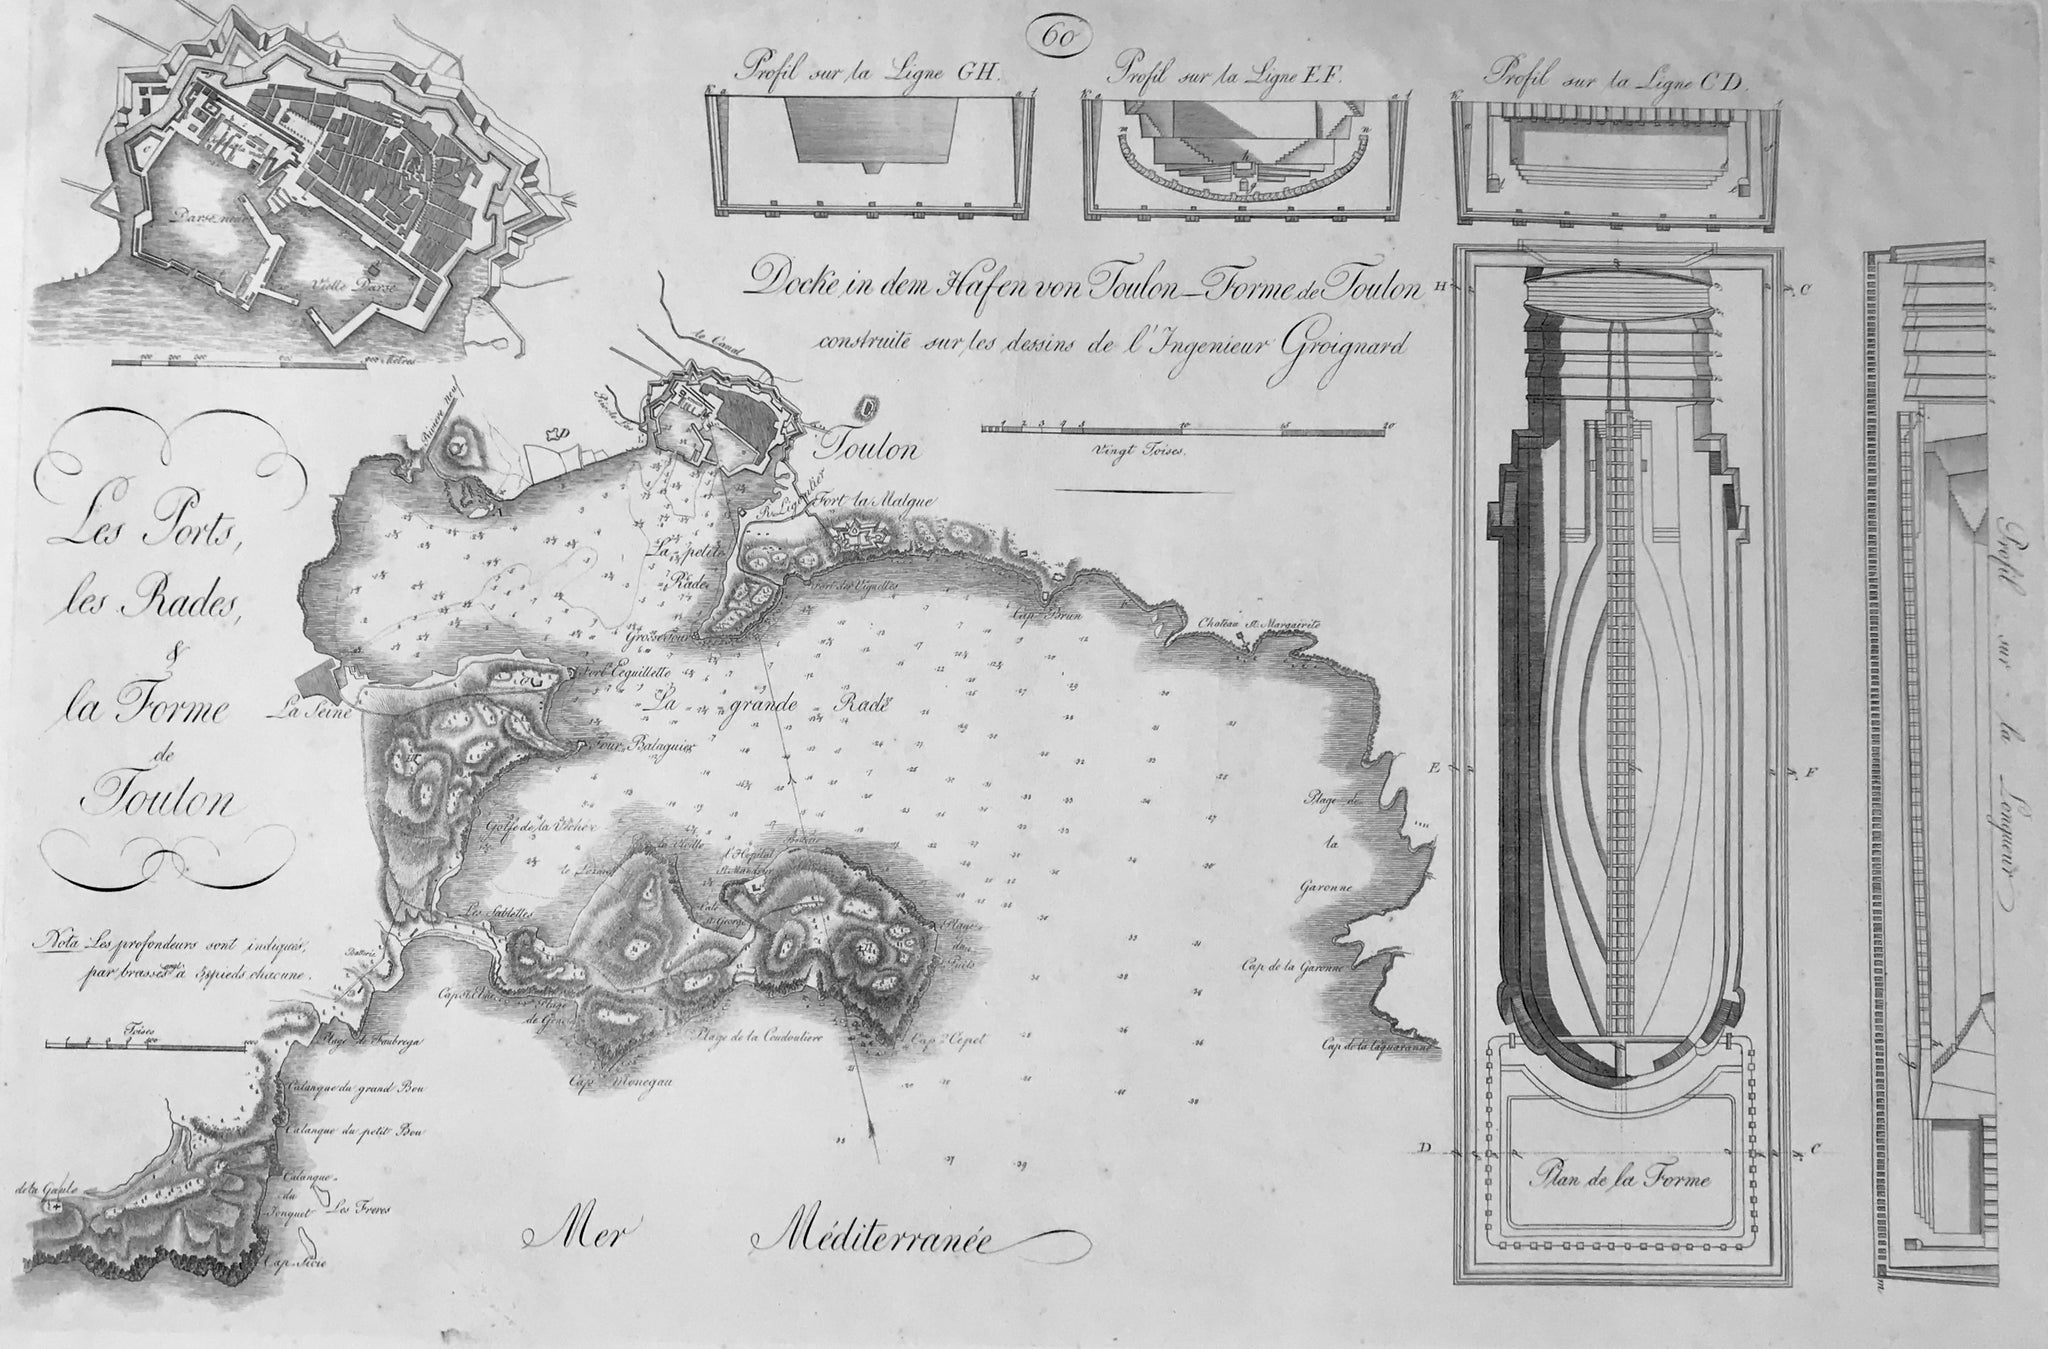 Toulon, FRANCE  "Les Ports, les Rades, & la Forme de Toulon"  Detailed plan of harbor and anchoring grounds of Toulon in France  Copperplate etching after the drawing by Antoine Groignard (1727-1798)  Published in: "Allgemeine und aufgeschriebene begründete theoretisch-praktische Wasserbaukunst"